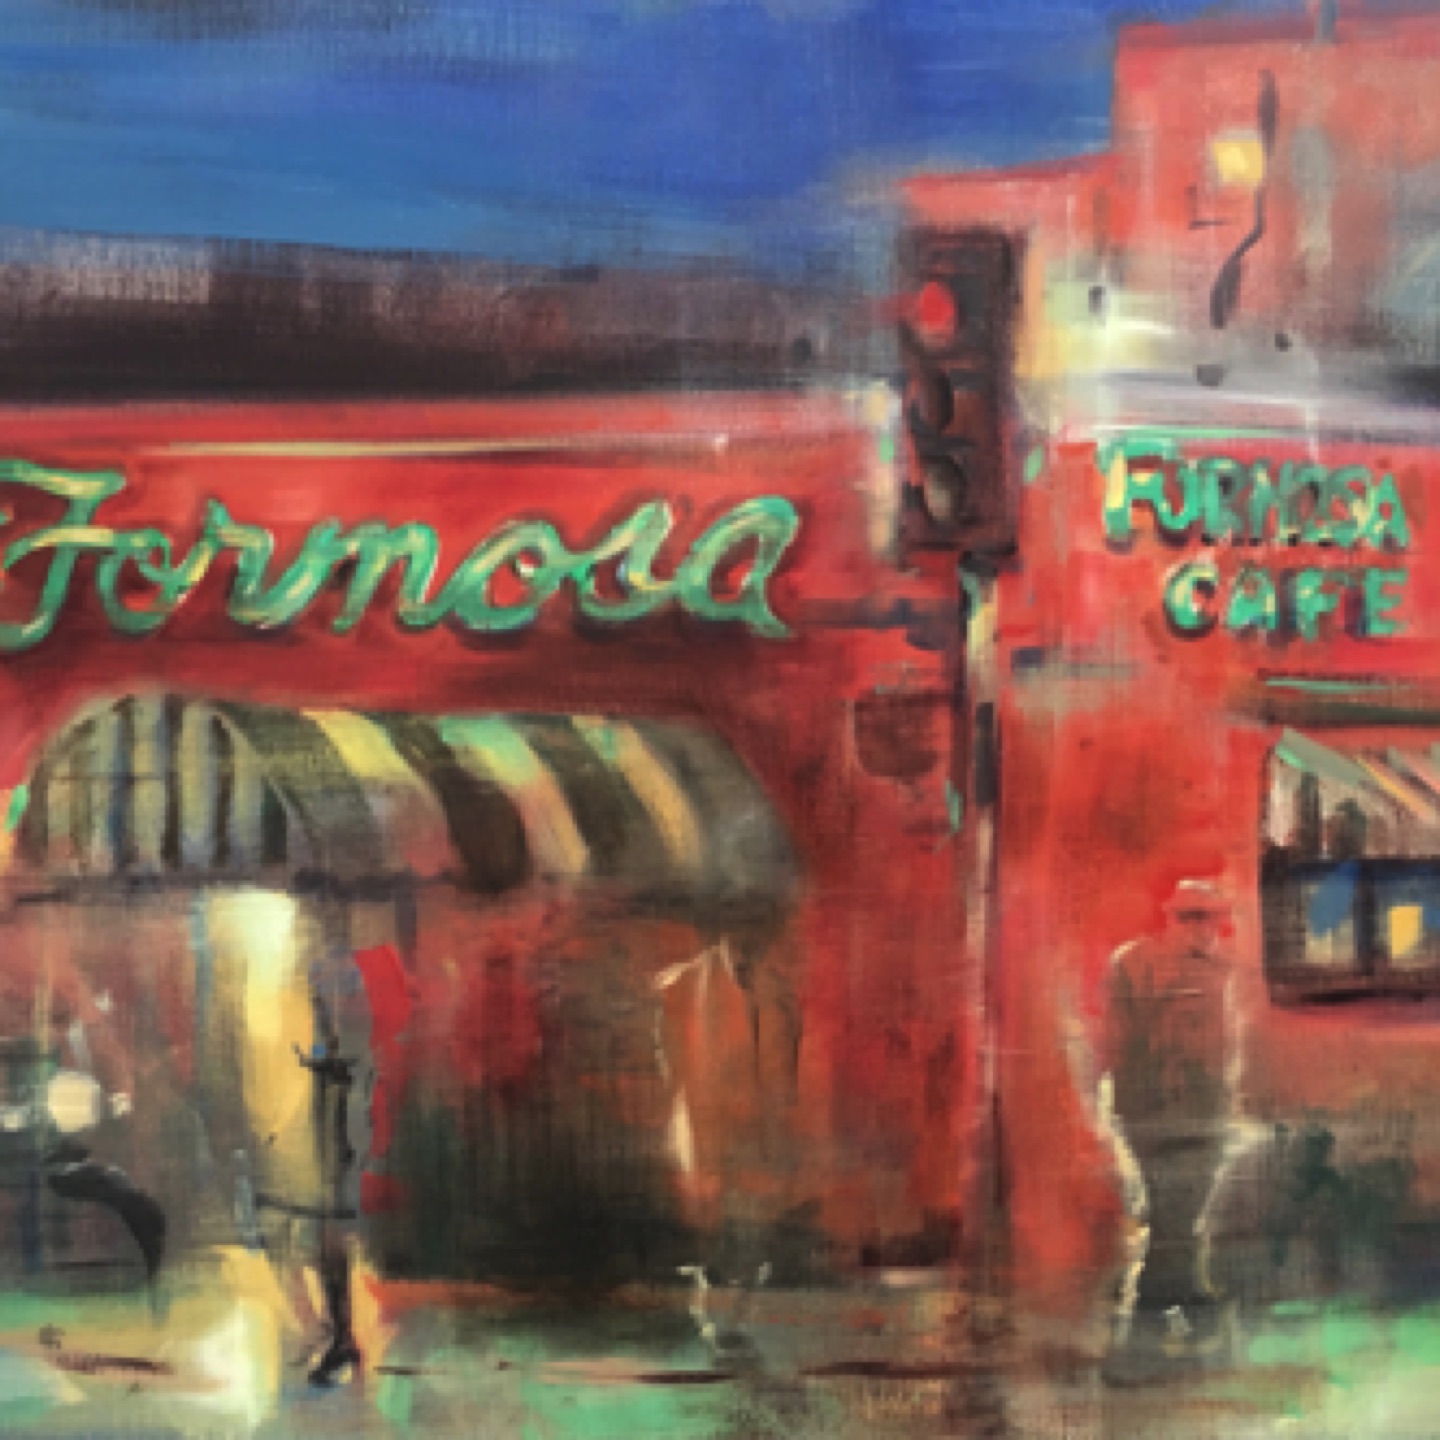 Gregg Chadwick
L.A. Noire (Formosa Cafe)
24"x36"oil on linen 2019
Private Collection, Hollywood, California